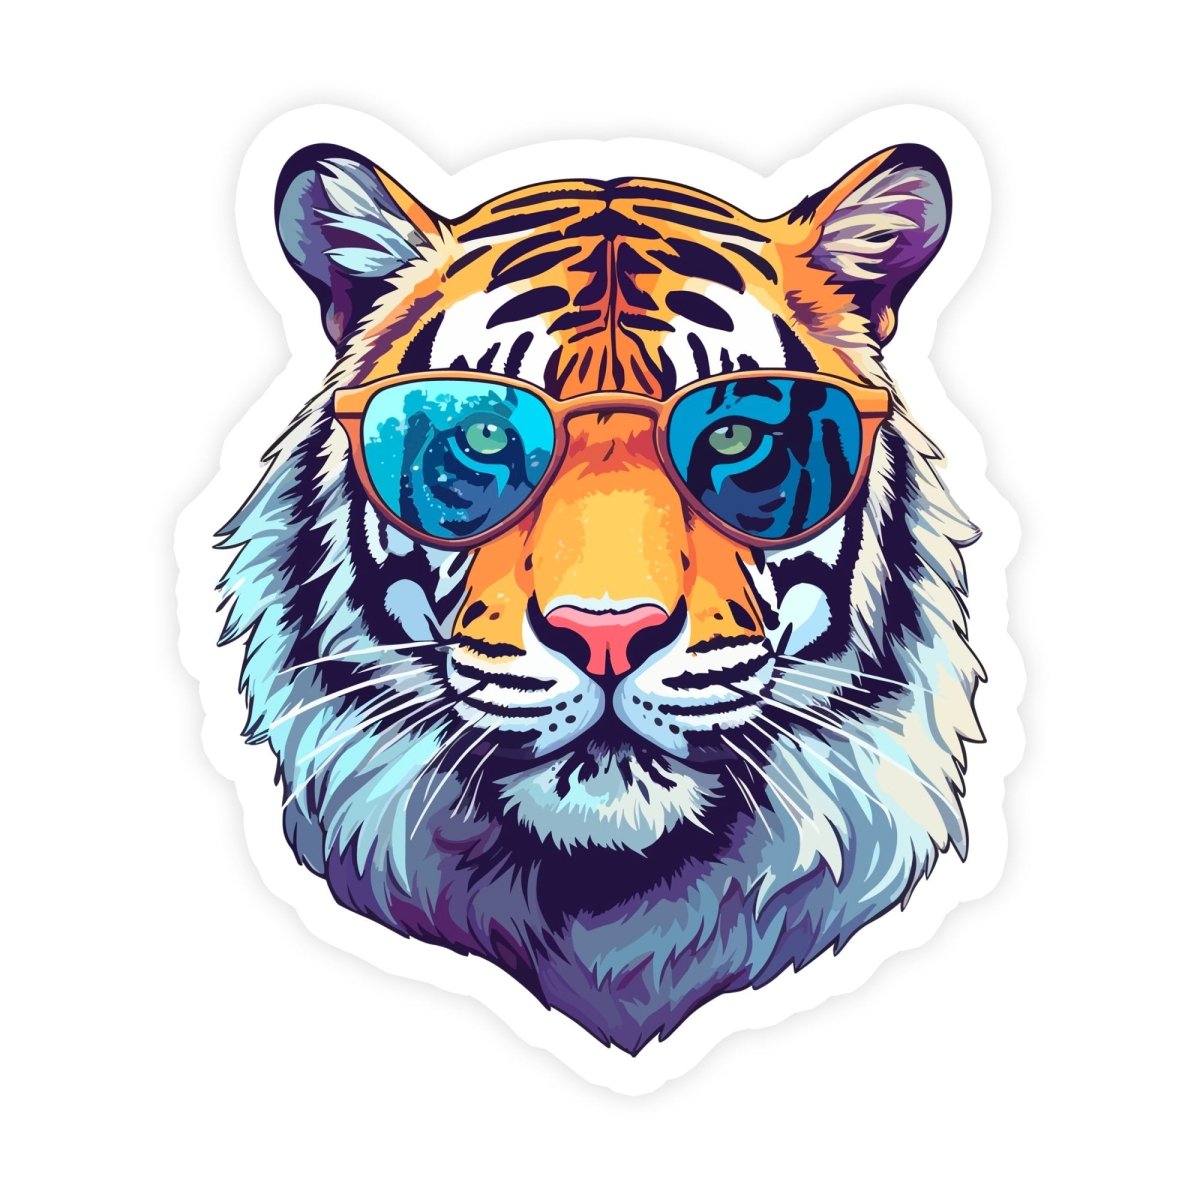 Cool Tiger With Glasses Sticker - stickerbullCool Tiger With Glasses StickerStickersstickerbullstickerbullSammy_GlassesTigerCool Tiger With Glasses Sticker